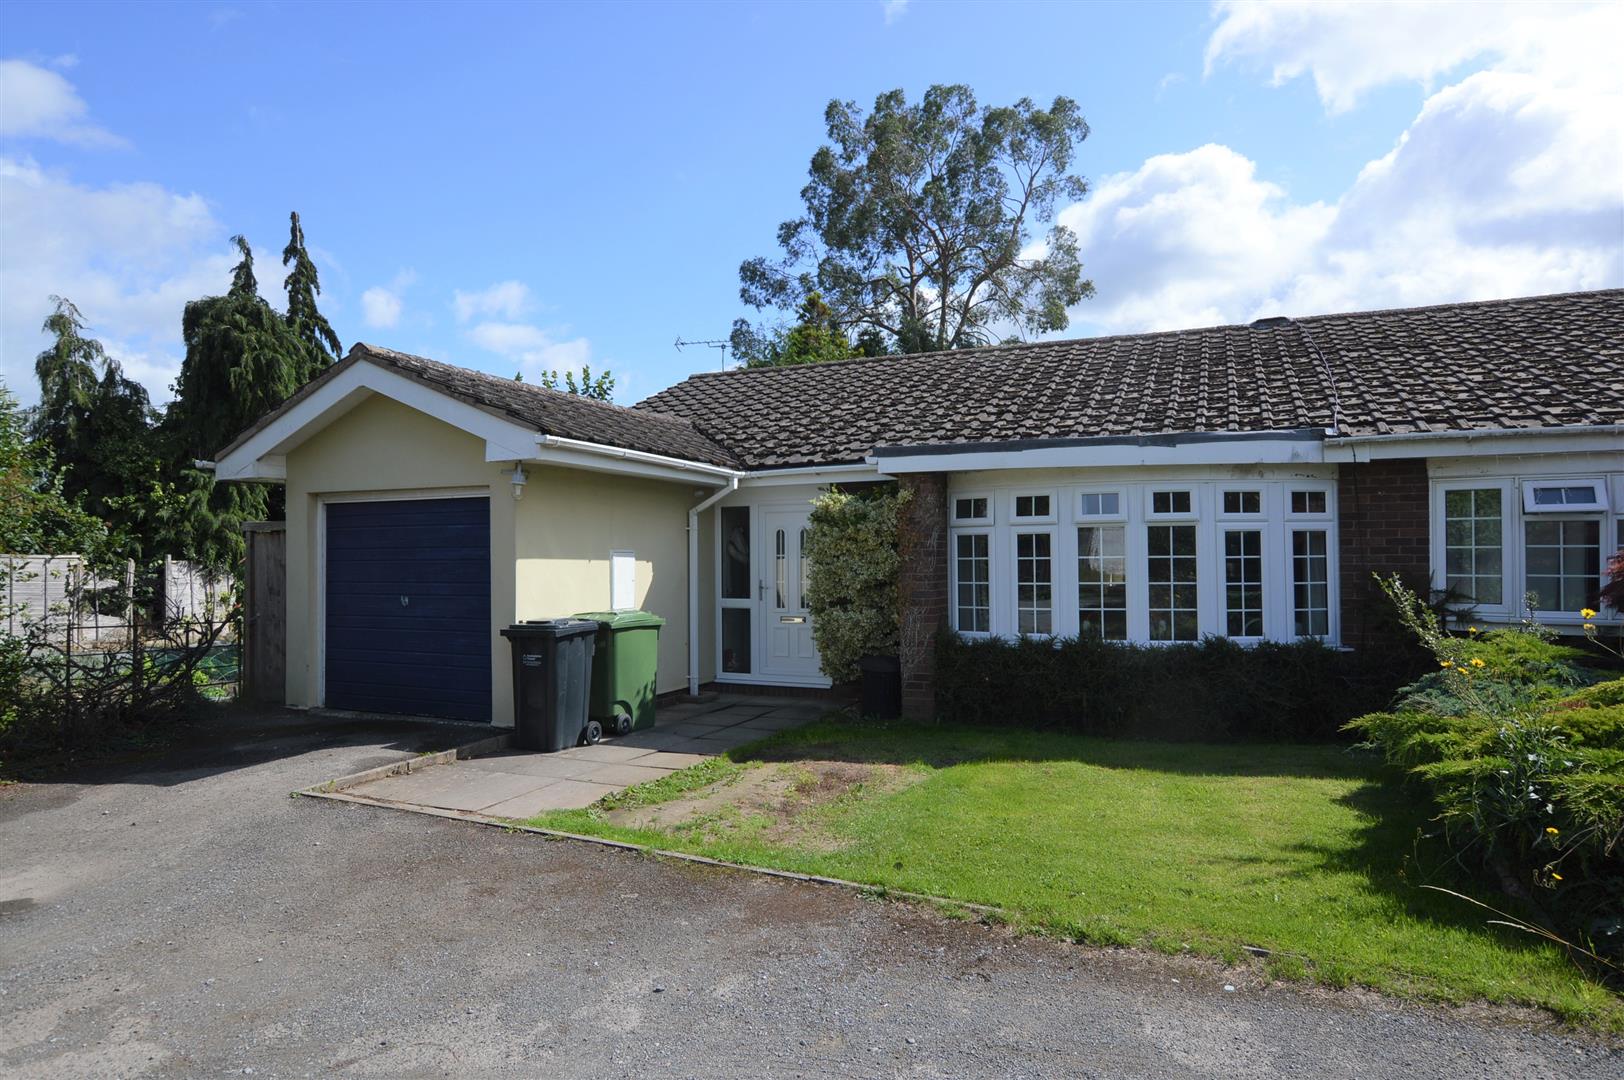 2 bed semi-detached bungalow for sale in Leominster, HR6